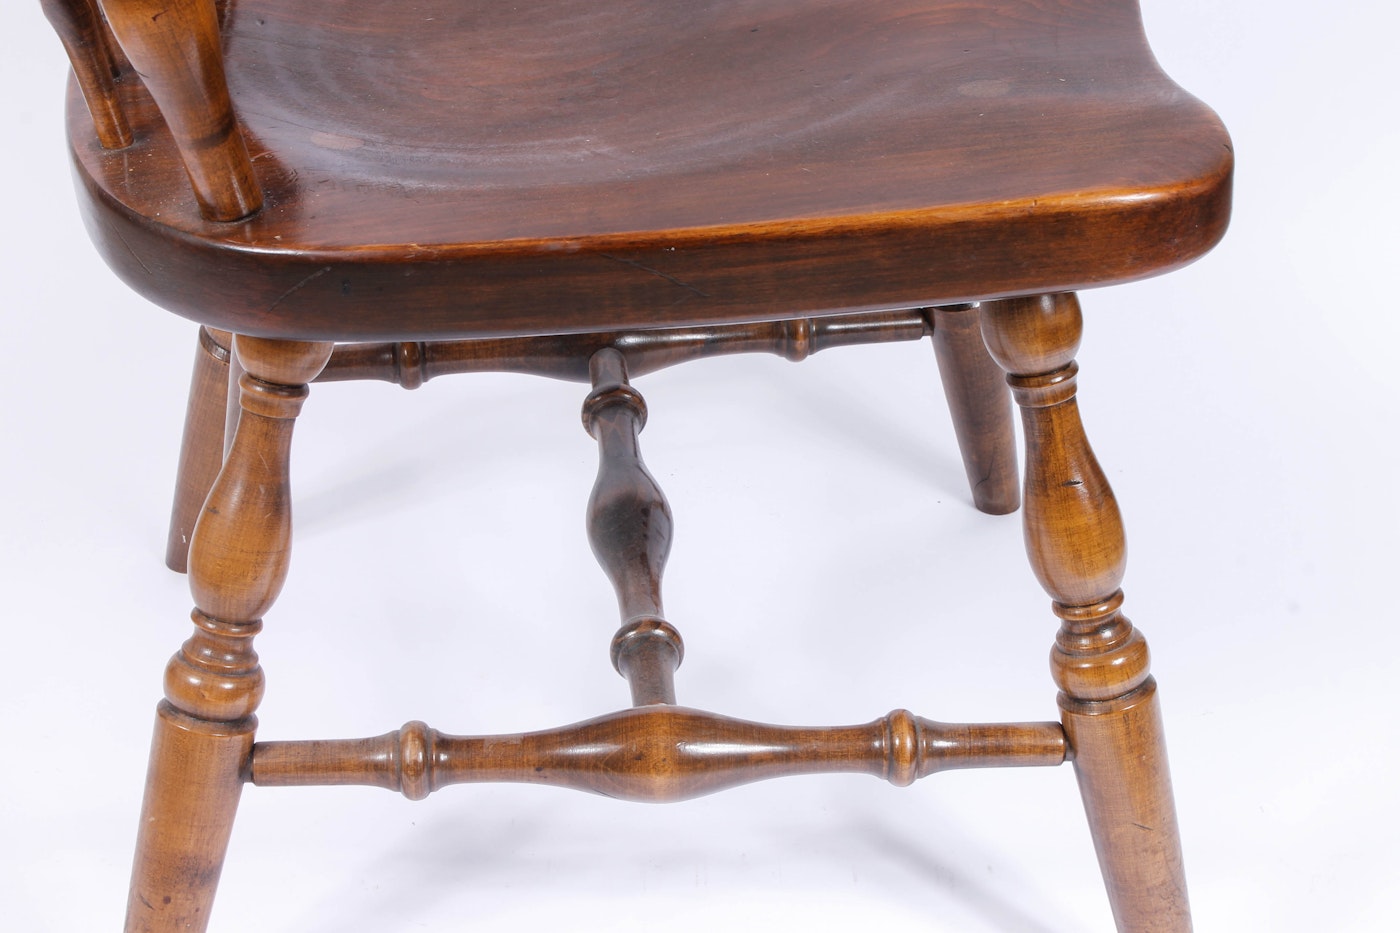 Early American Dining Room Table And Chairs